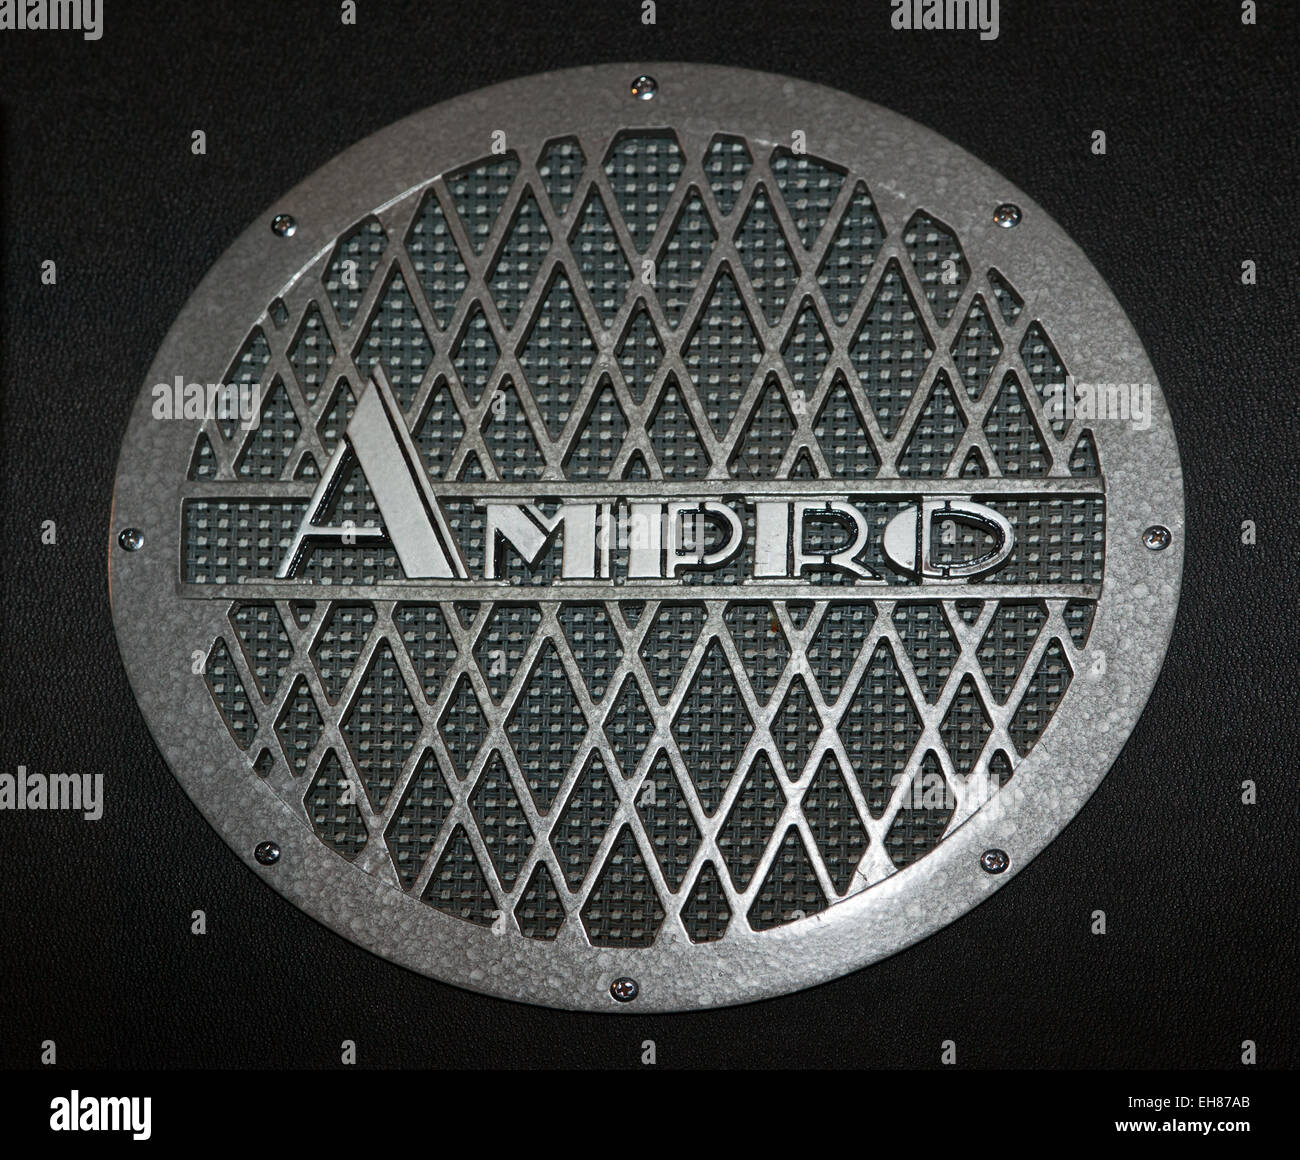 Close-up view of the speaker grill of a vintage Ampro speaker cabinet from the 1950'S Stock Photo